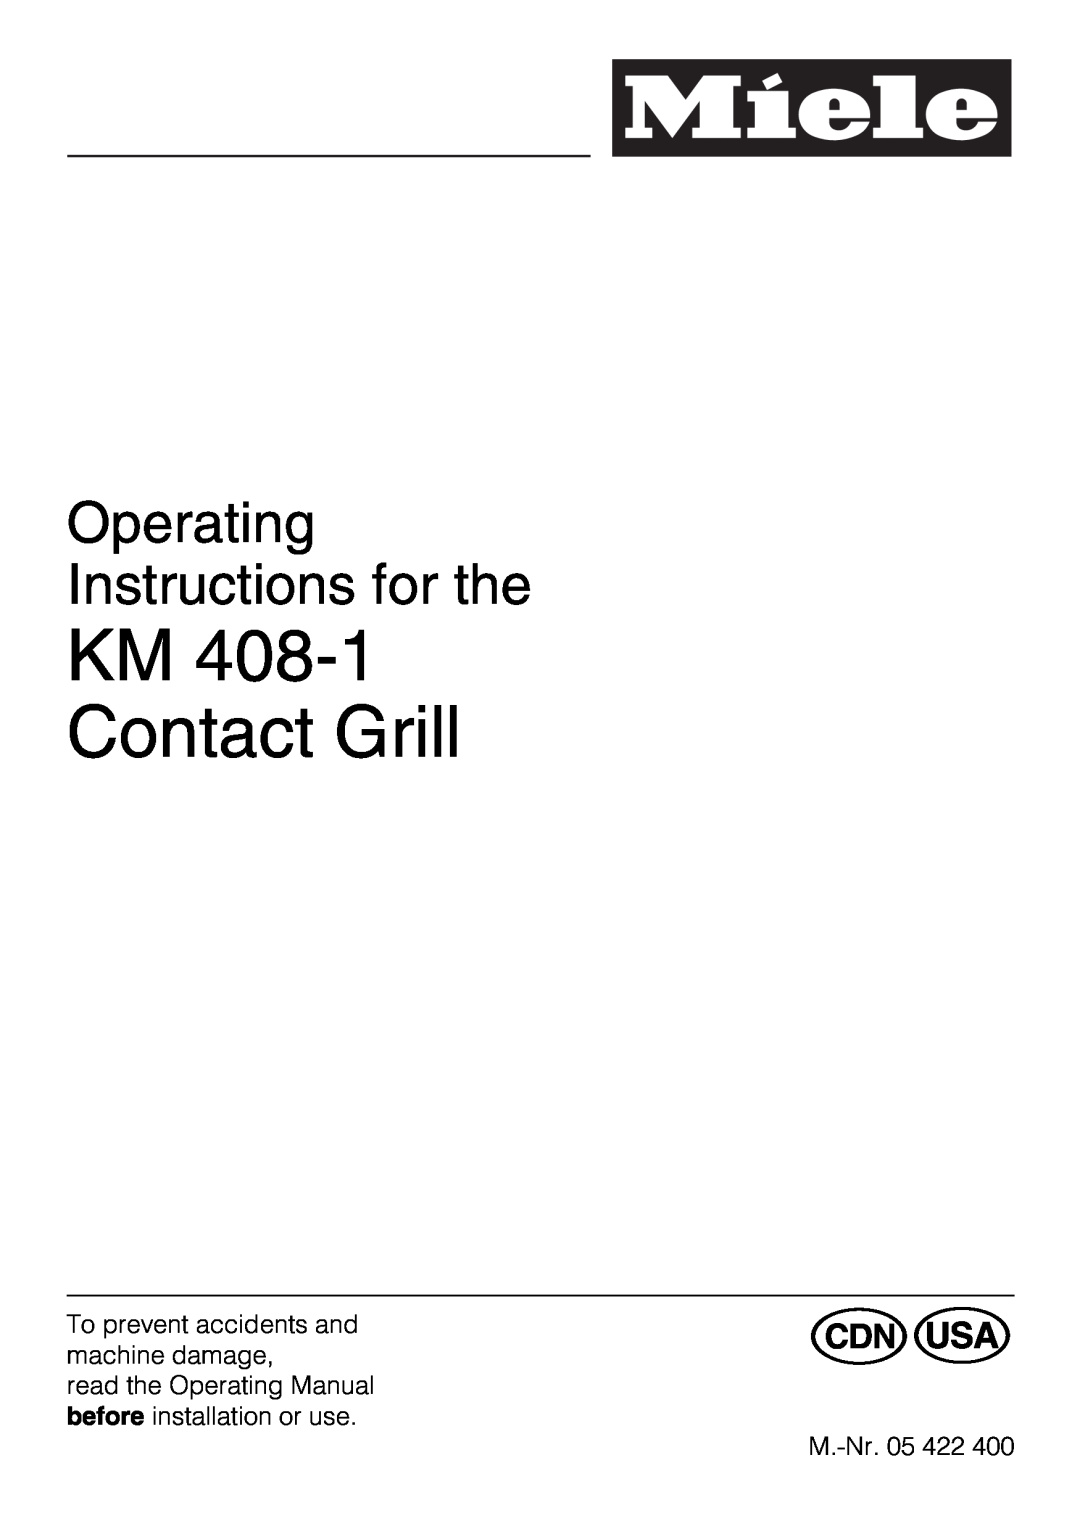 Miele KM 408-1 manual KM Contact Grill, Operating Instructions for the 